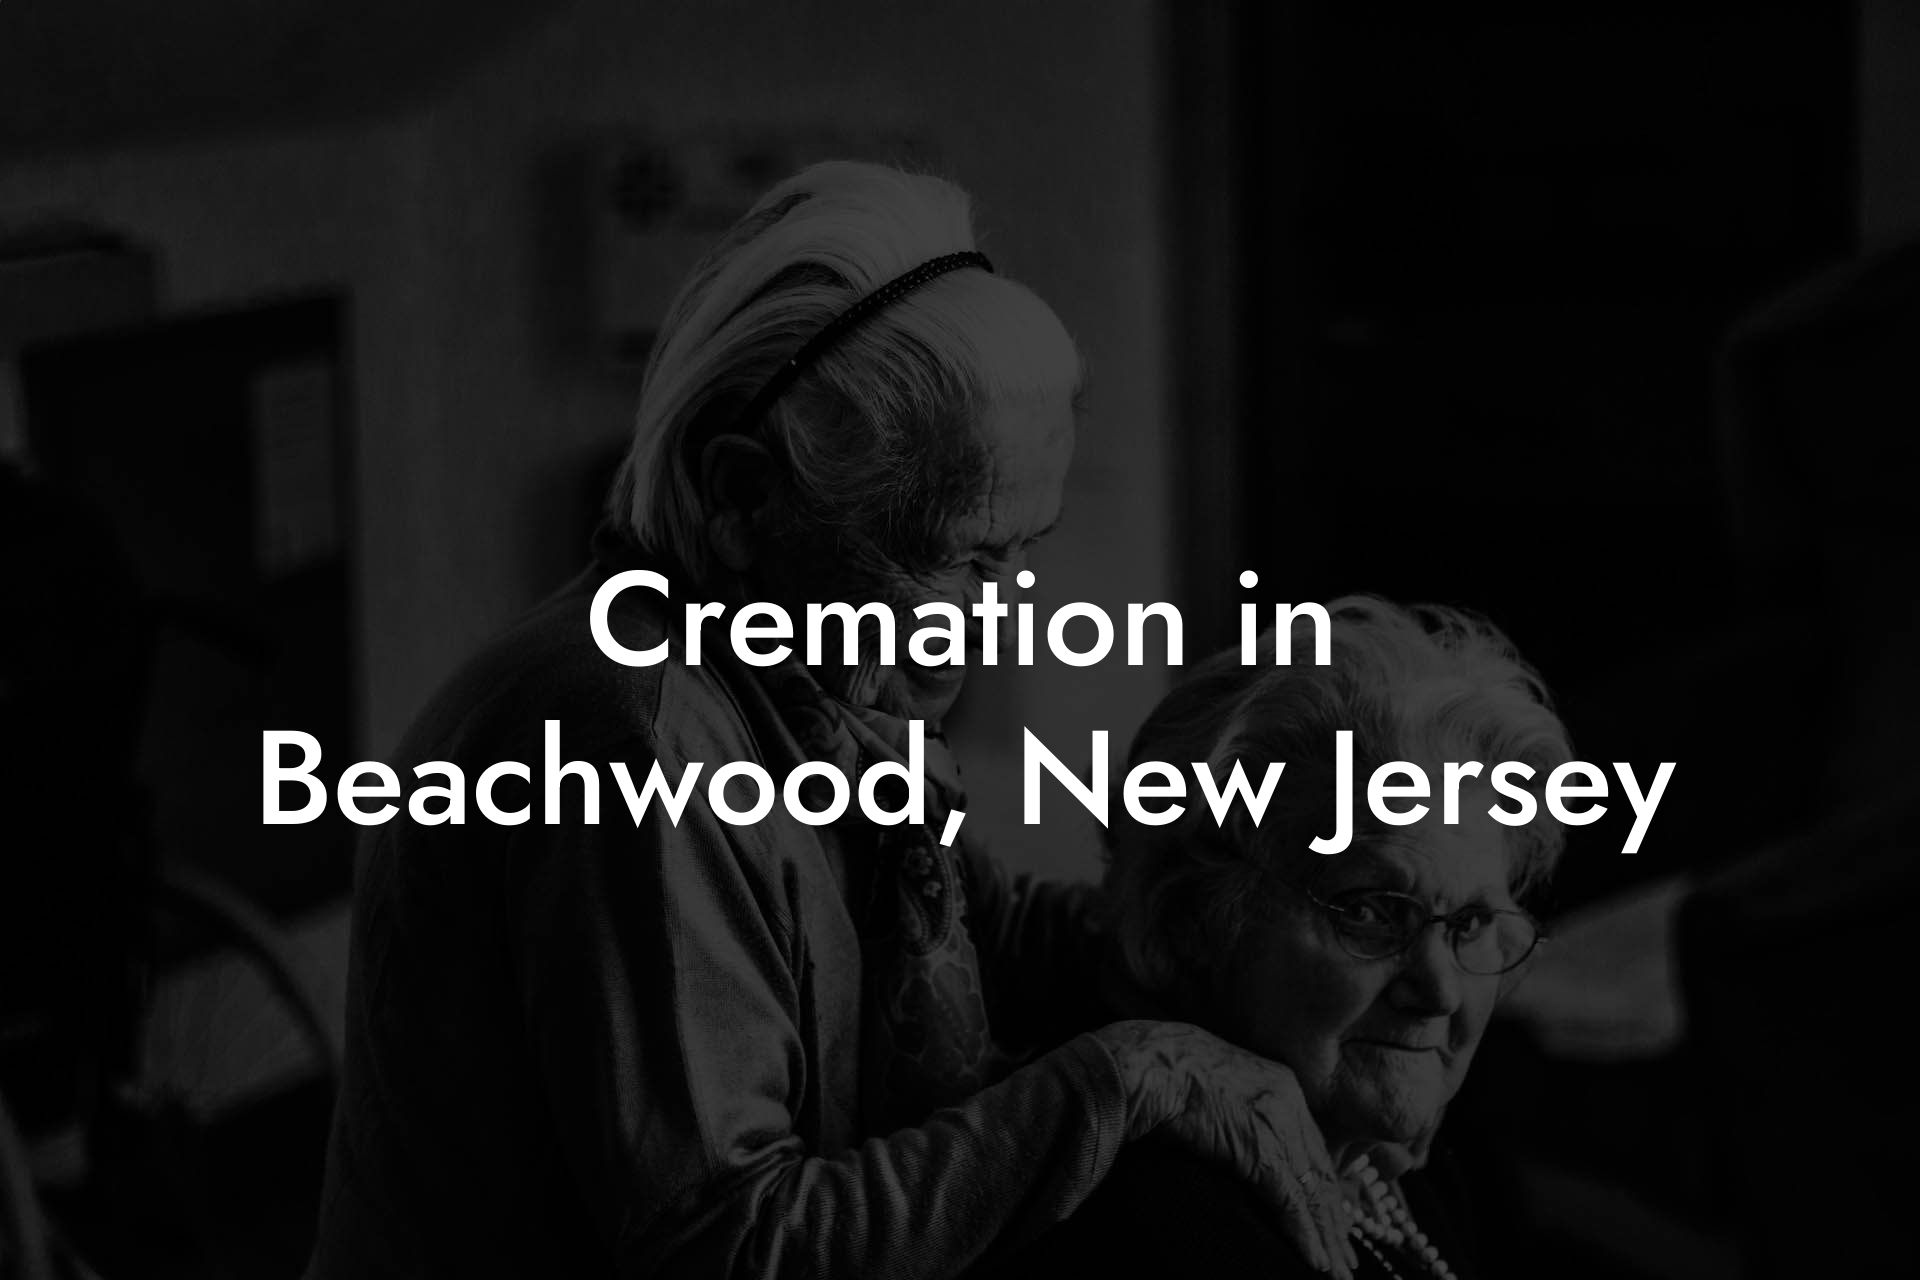 Cremation in Beachwood, New Jersey